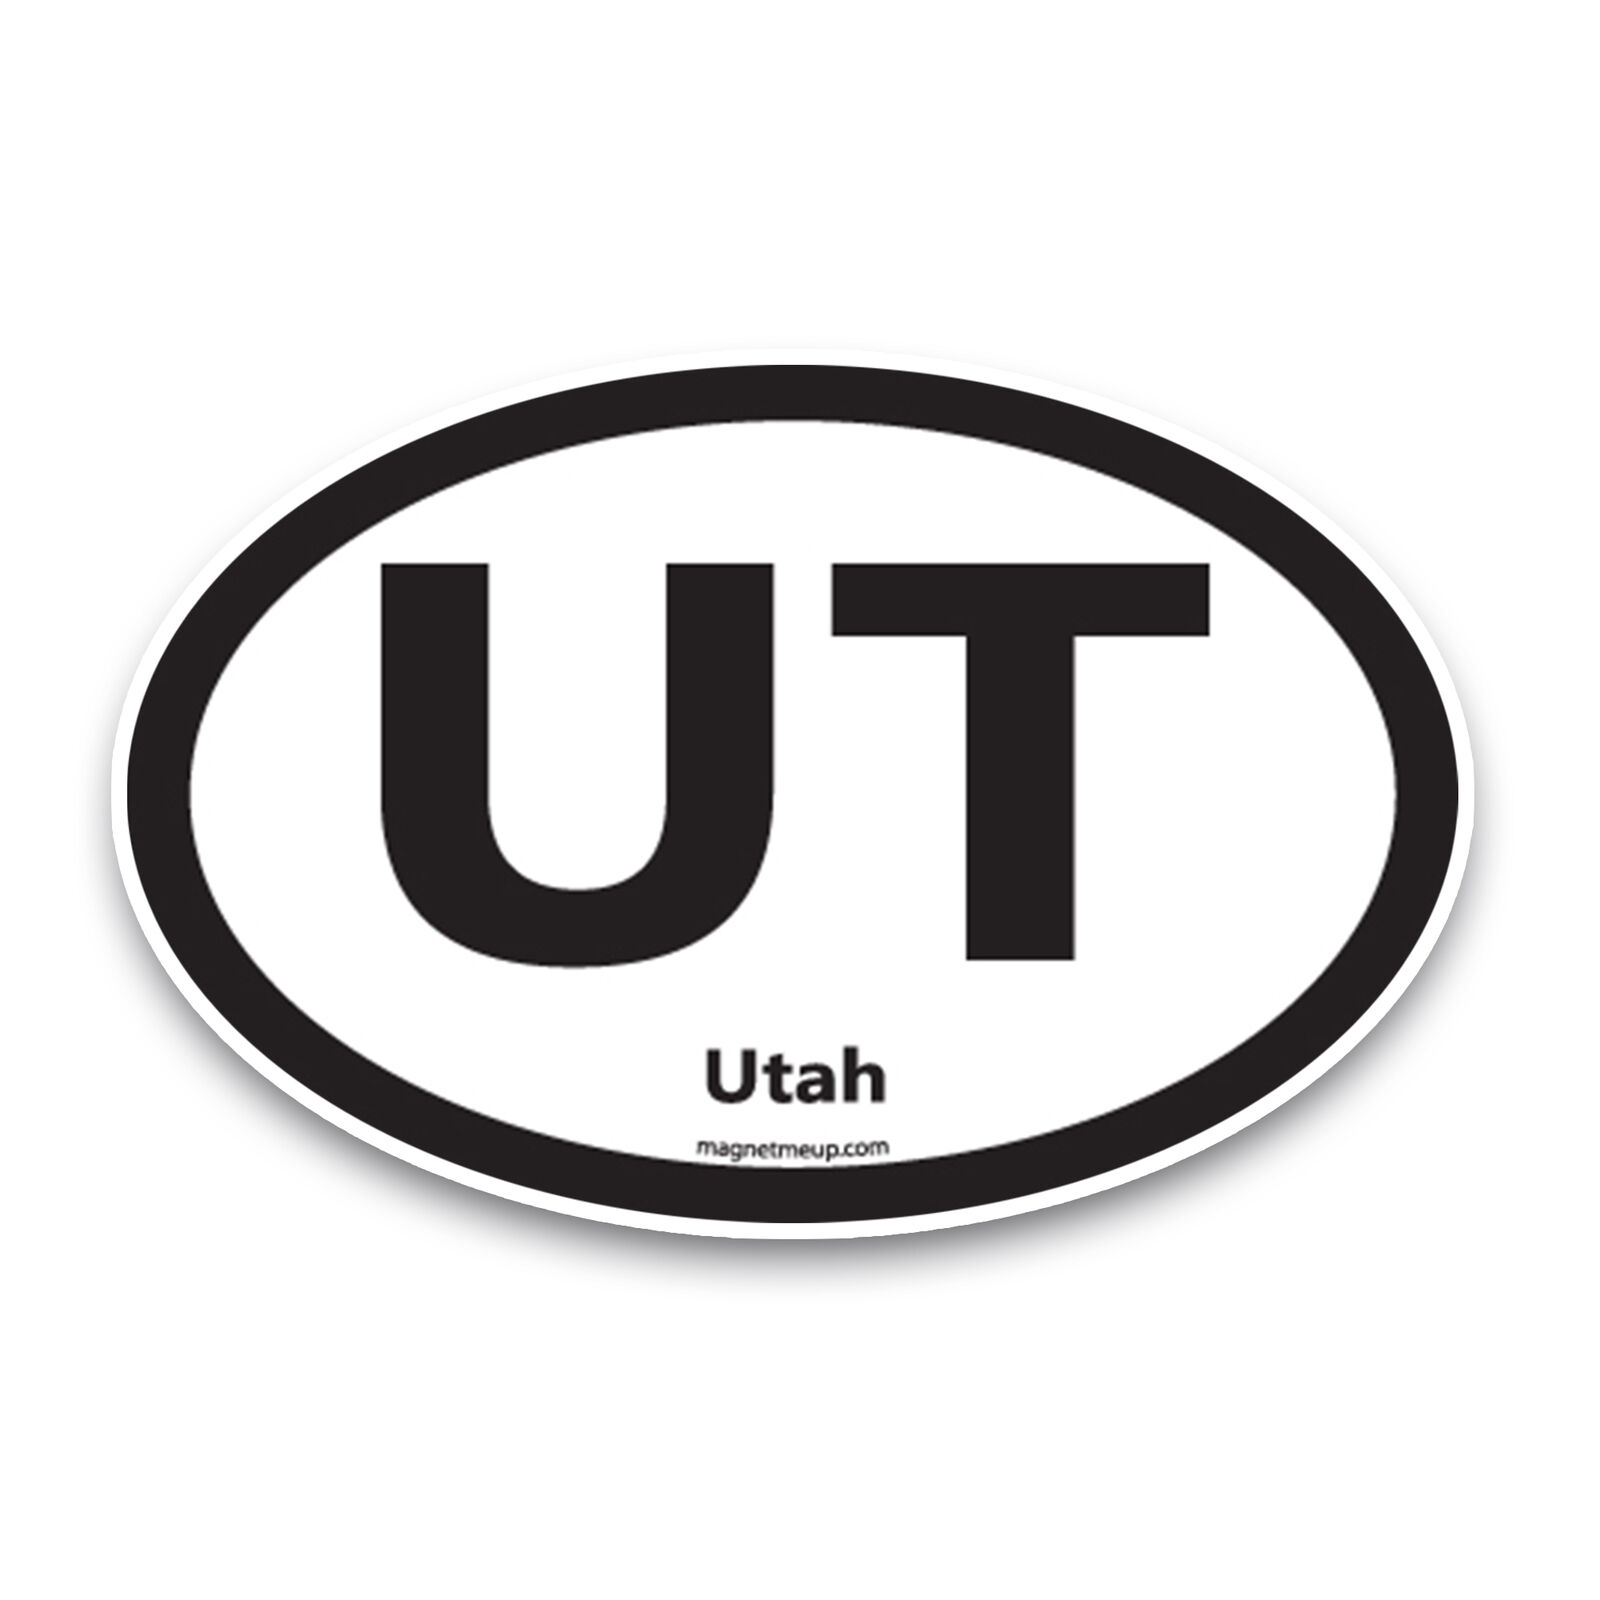 UT Utah US State Oval Magnet Decal, 4x6 Inches, Automotive Magnet